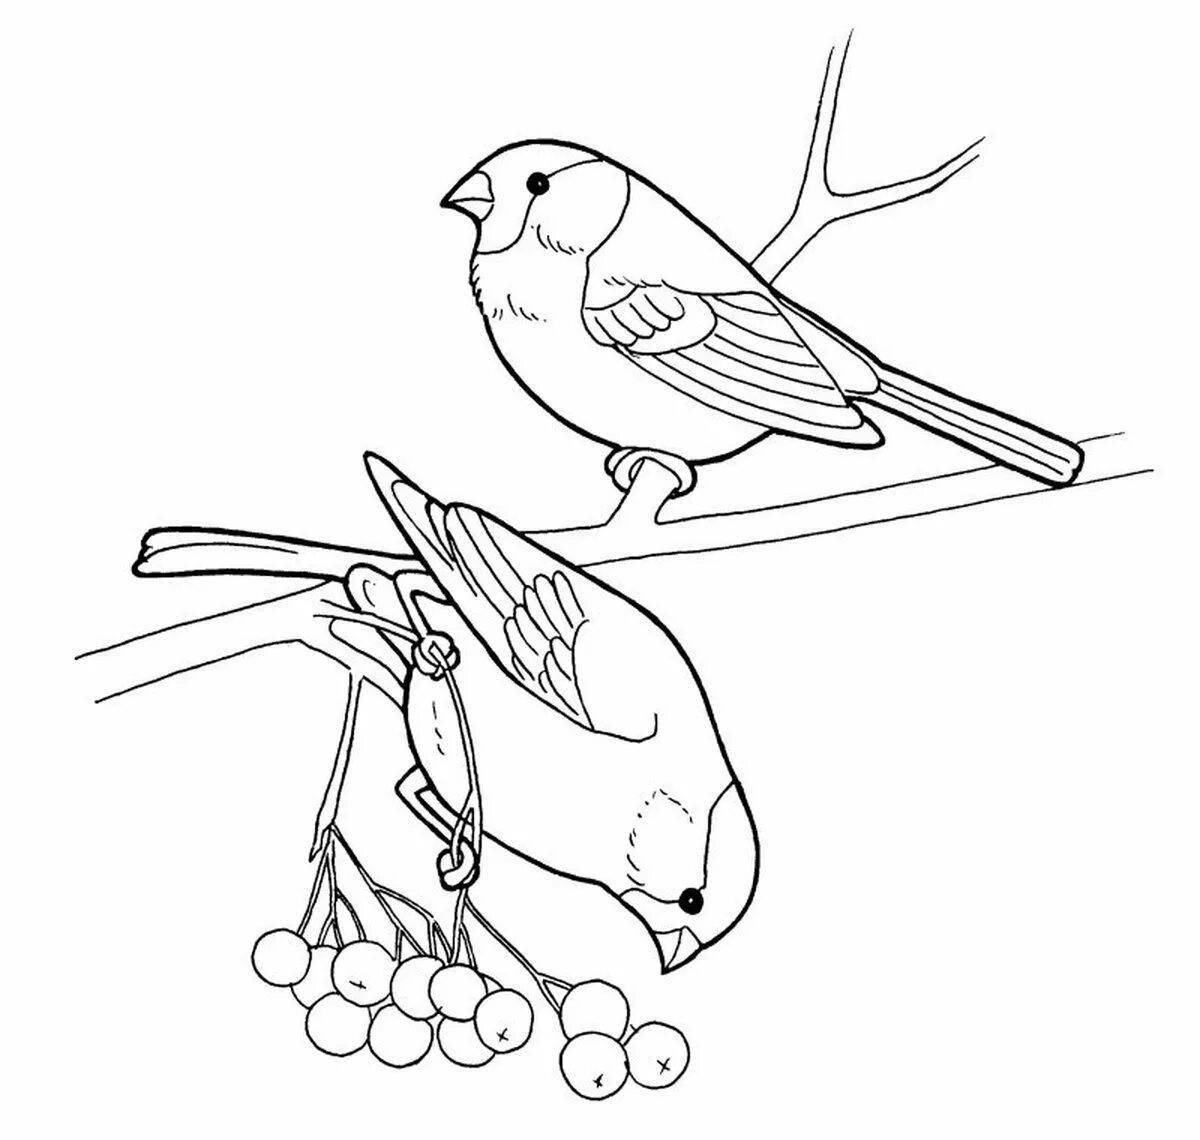 Glowing bullfinch and tit coloring page